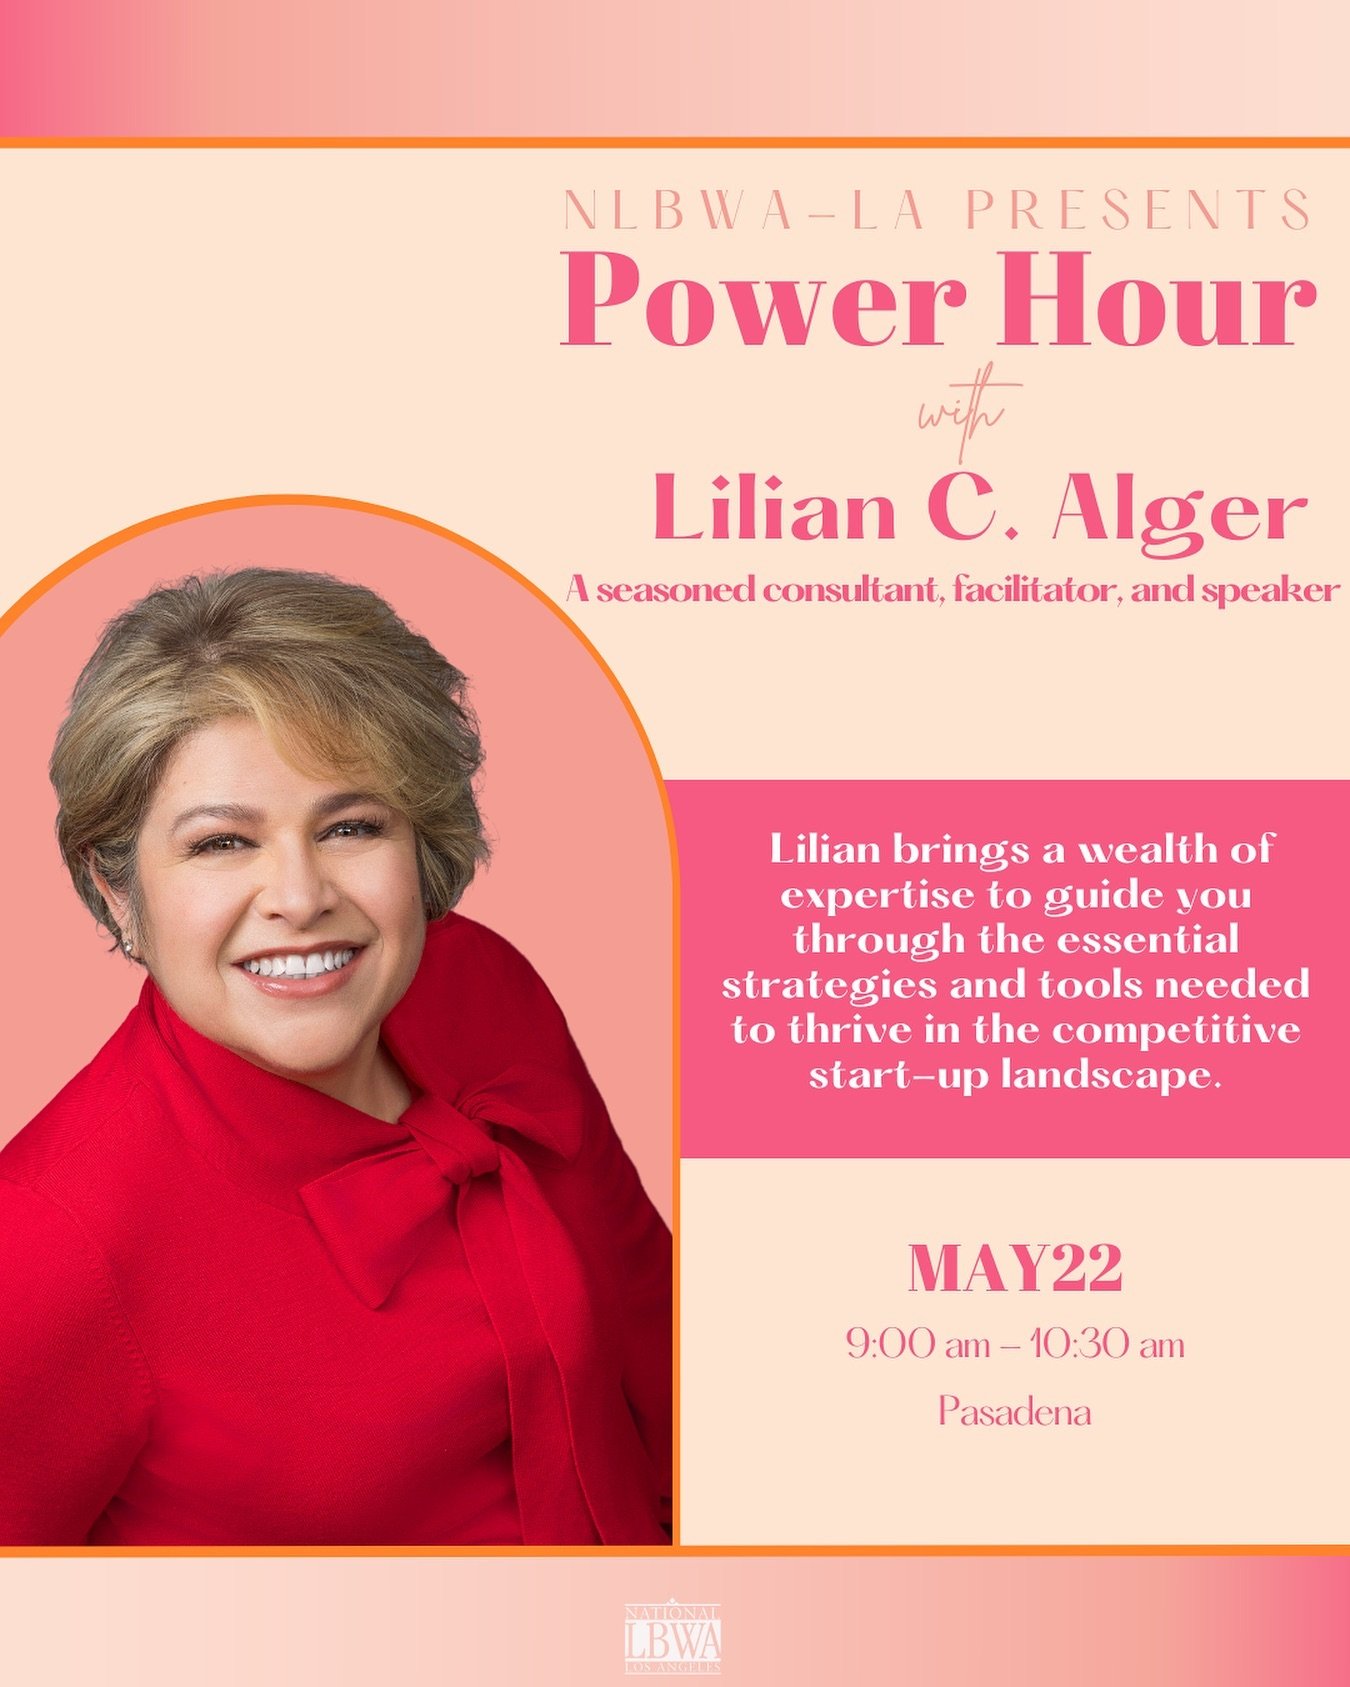 Members only!🥳💕 Join us for an empowering presentation on Start-Up Success tailored for women entrepreneurs, led by the insightful Lilian C. Alger.✨

As a seasoned consultant, facilitator, and speaker, she brings a wealth of expertise to guide you 